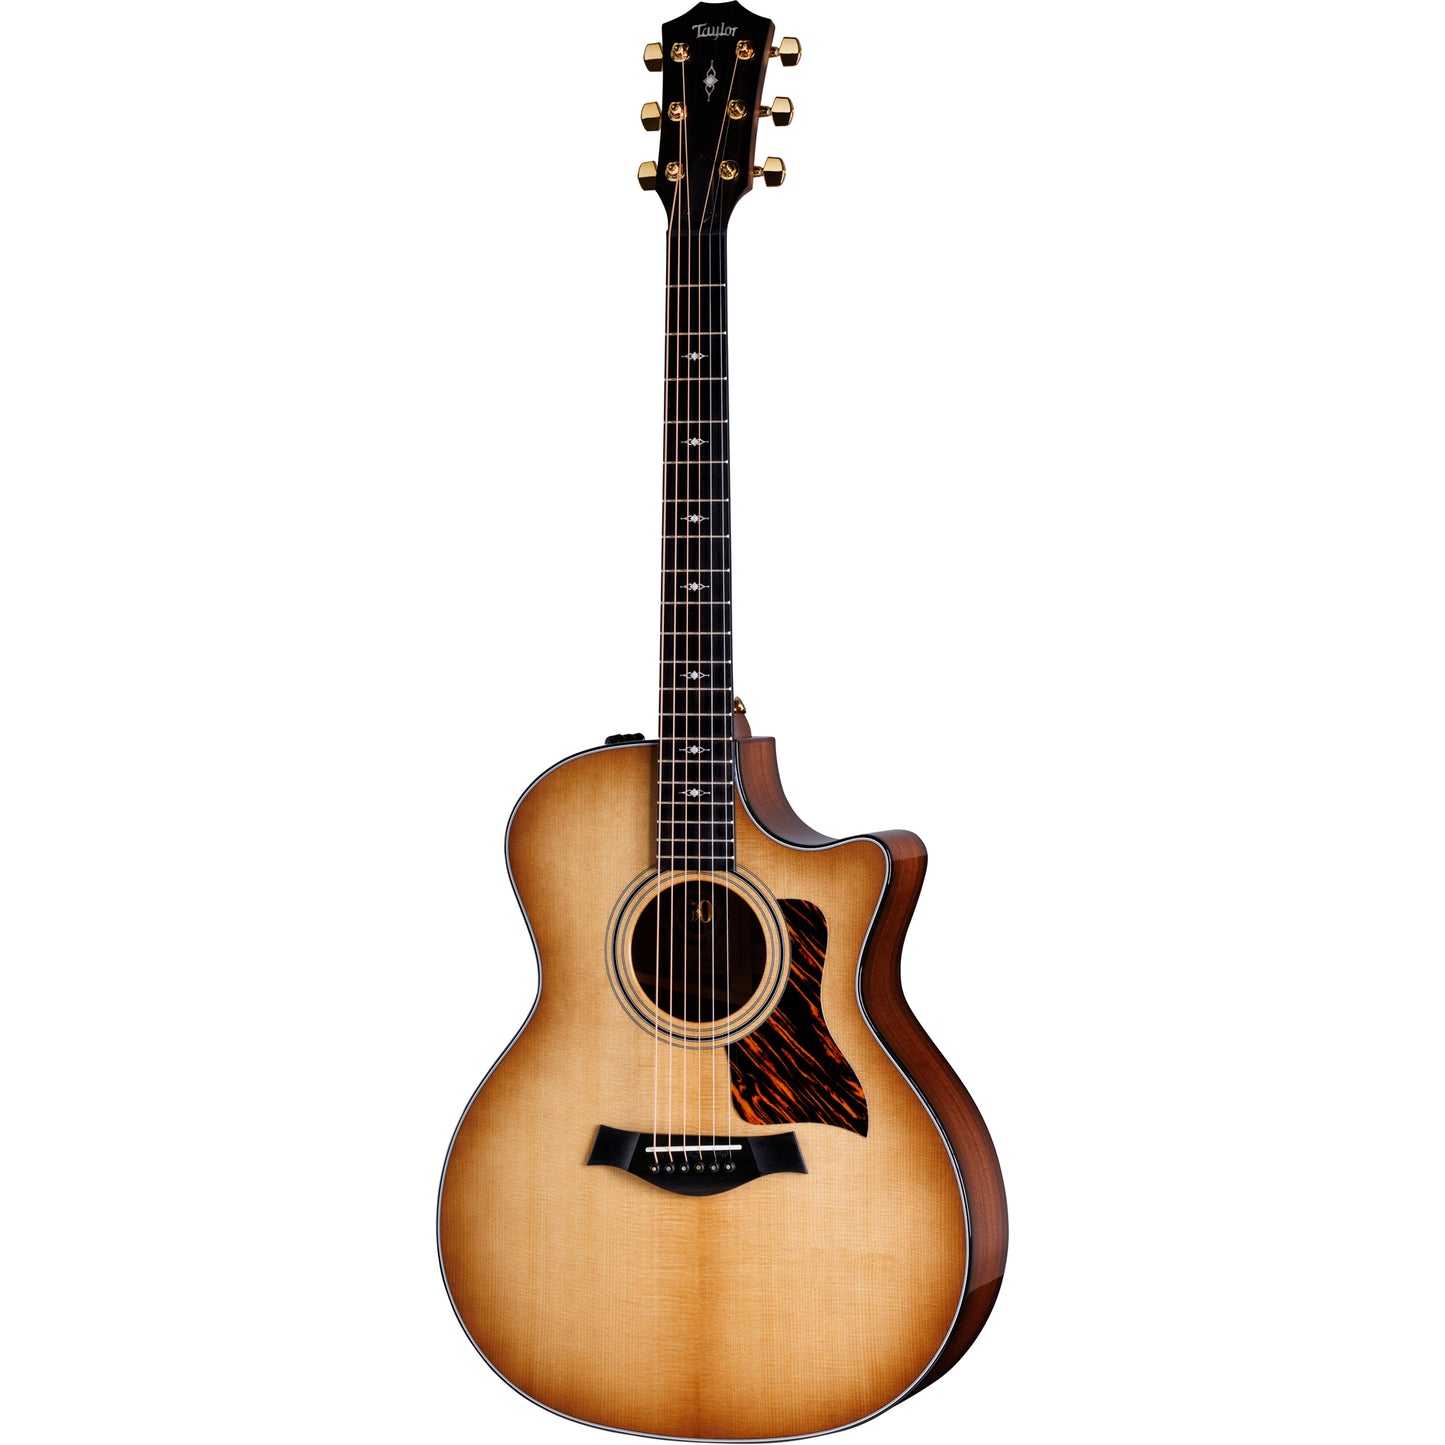 Taylor 50th Anniversary 314ce LTD Acoustic Electric Guitar - Shaded Edgeburst